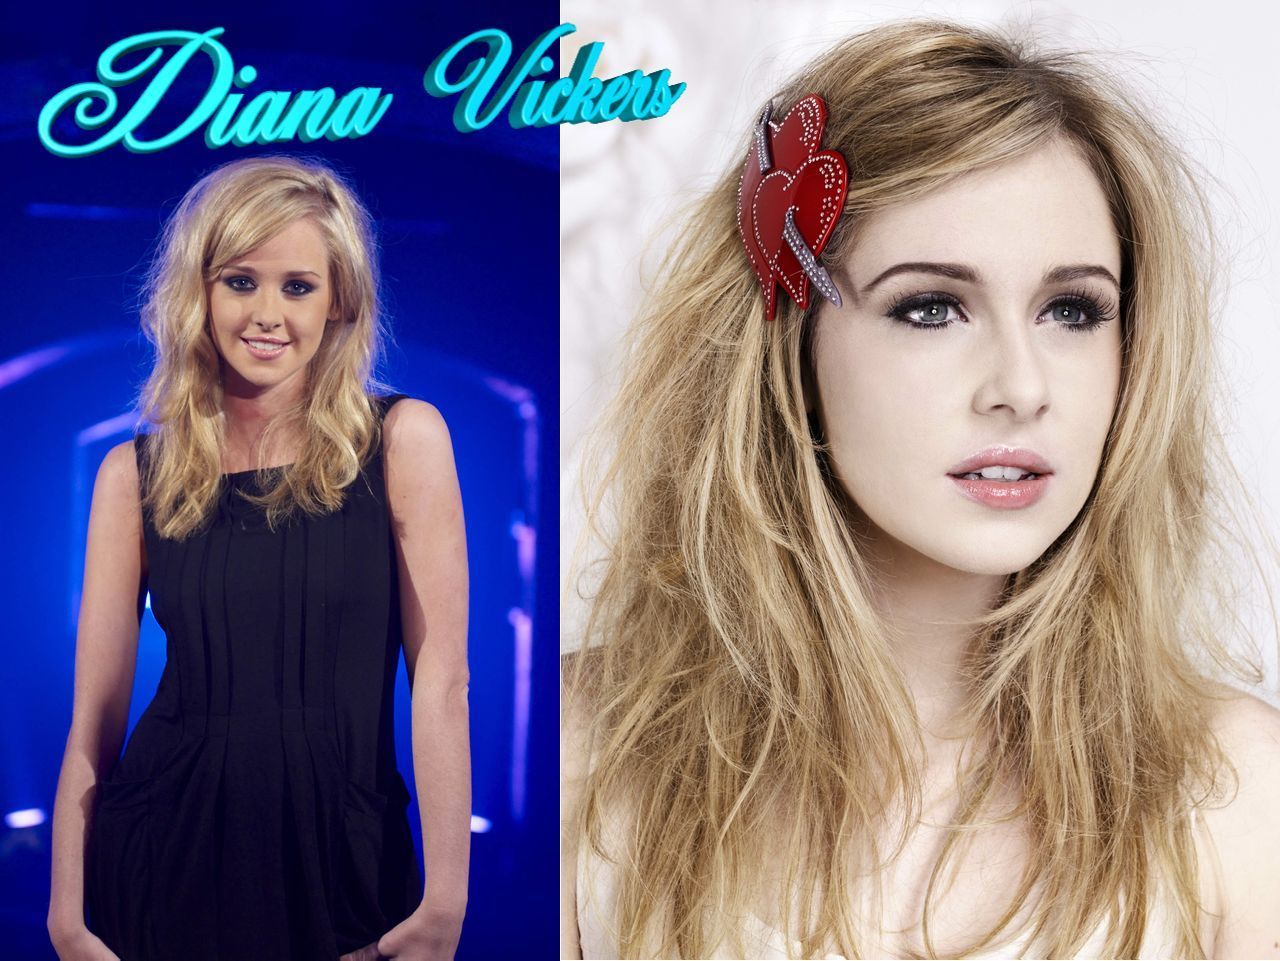 Diana Vickers - Picture Gallery